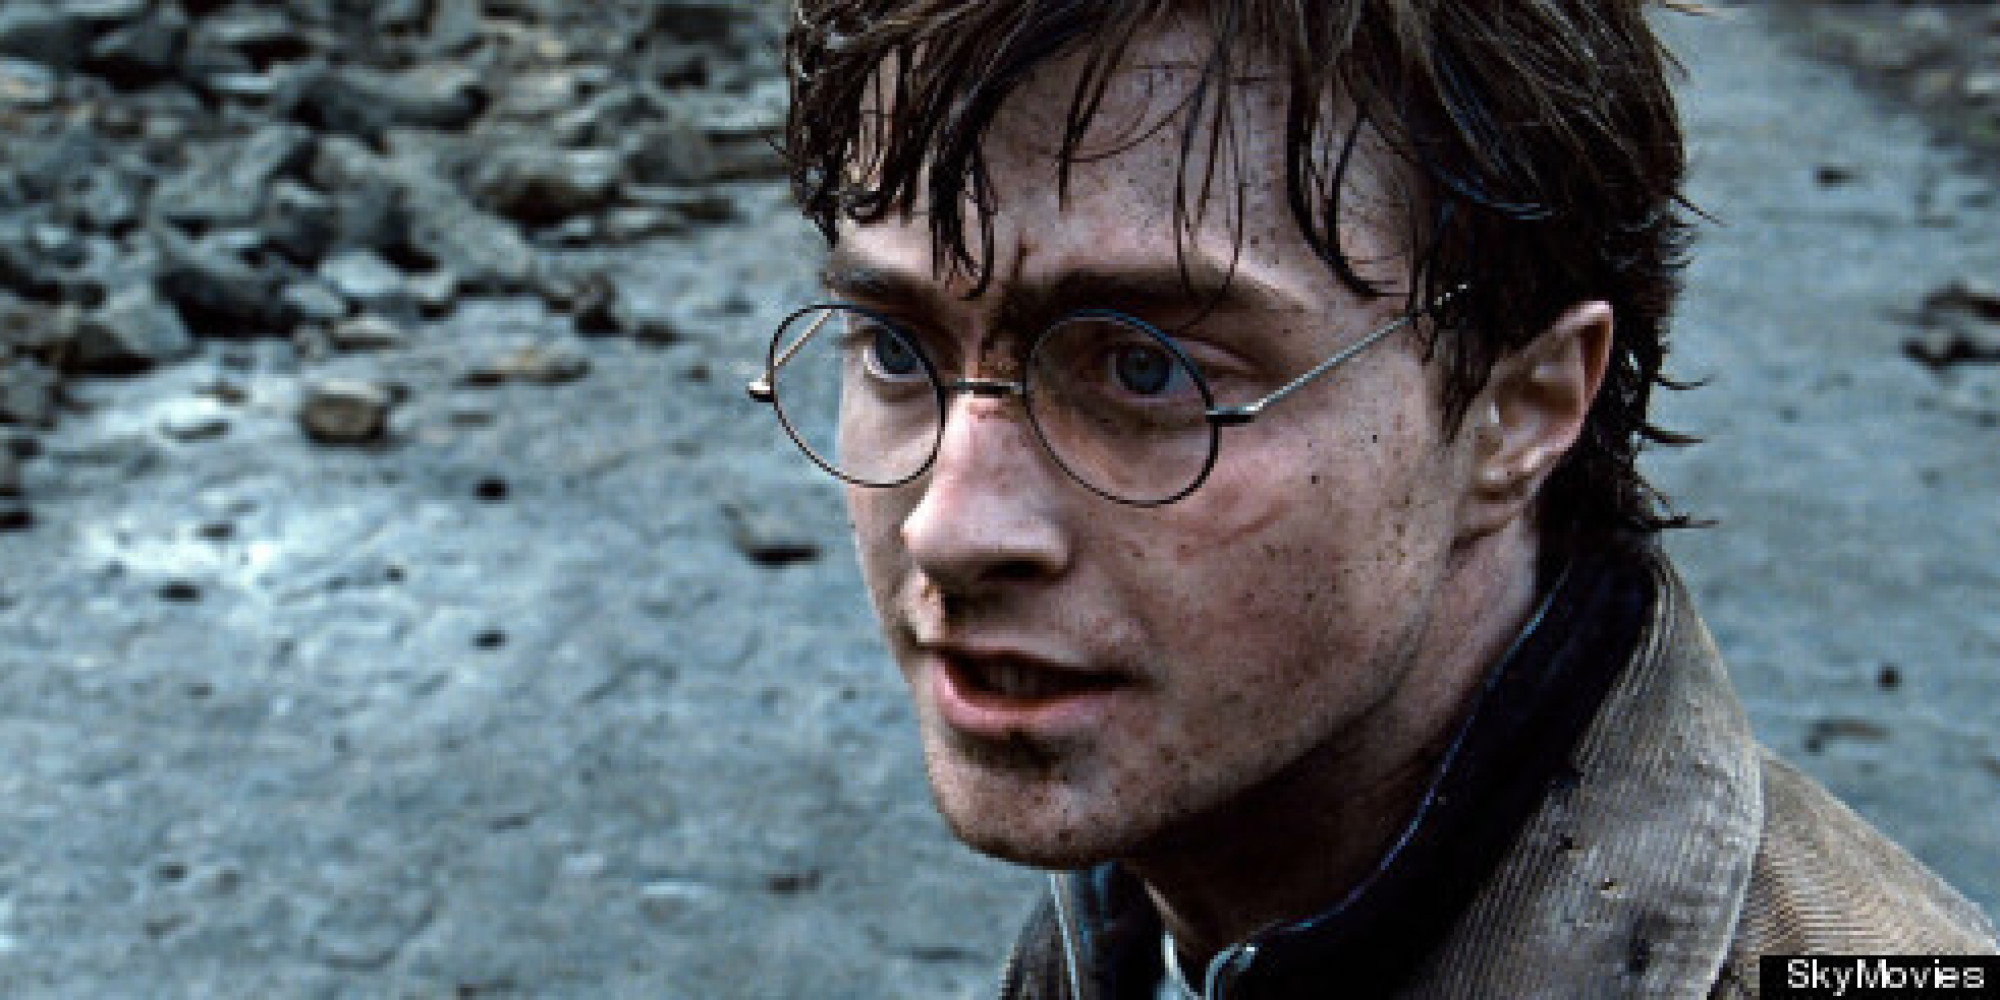 Harry Potter's Back! JK Rowling Pens New Story Featuring Character As A